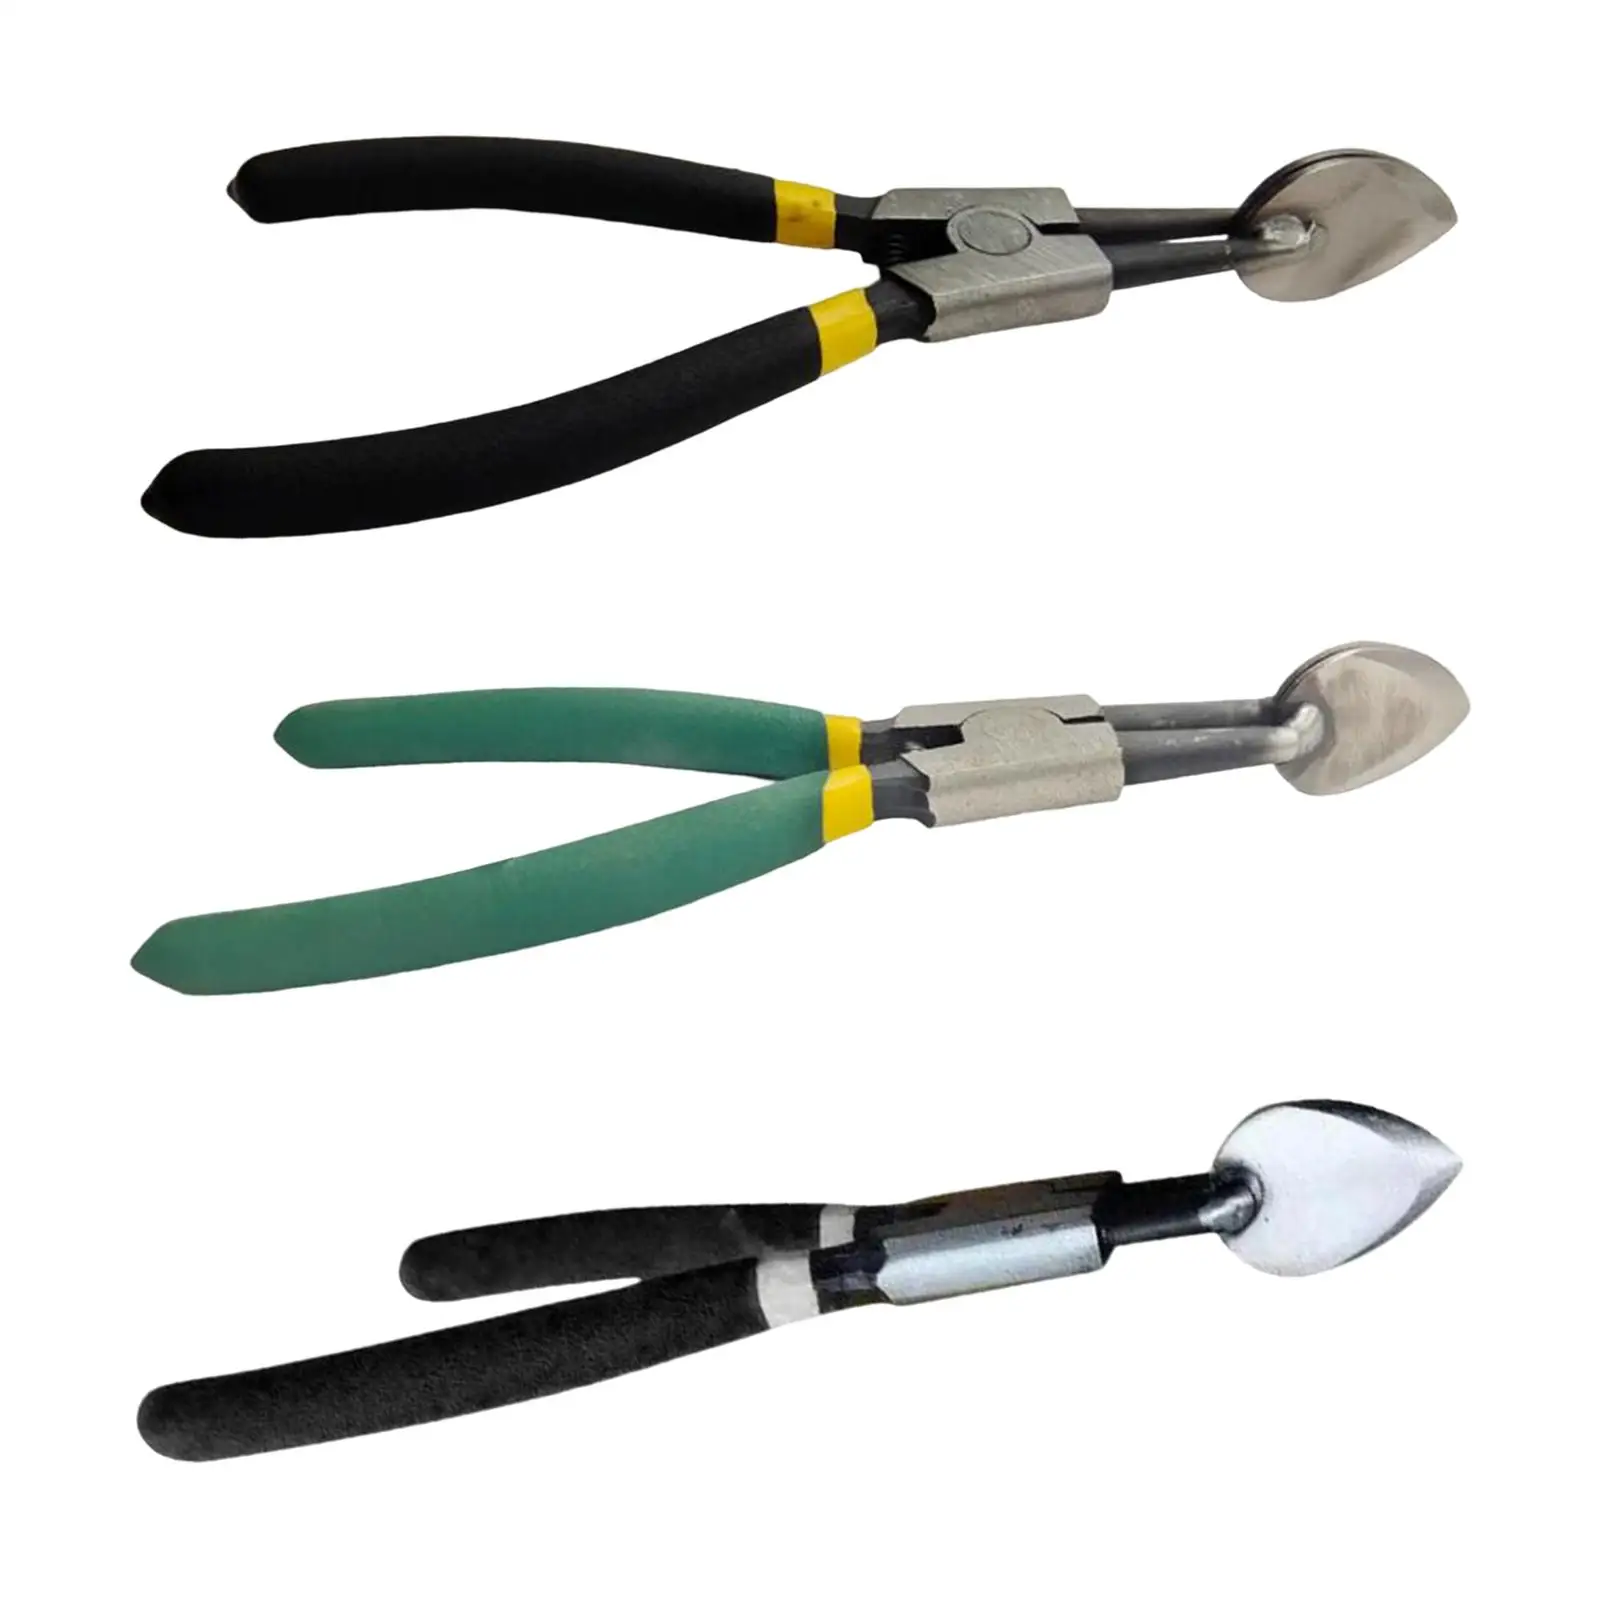 Practical Durian Opener Enlarge and Thicken Clip for Kitchen Cooking Camping